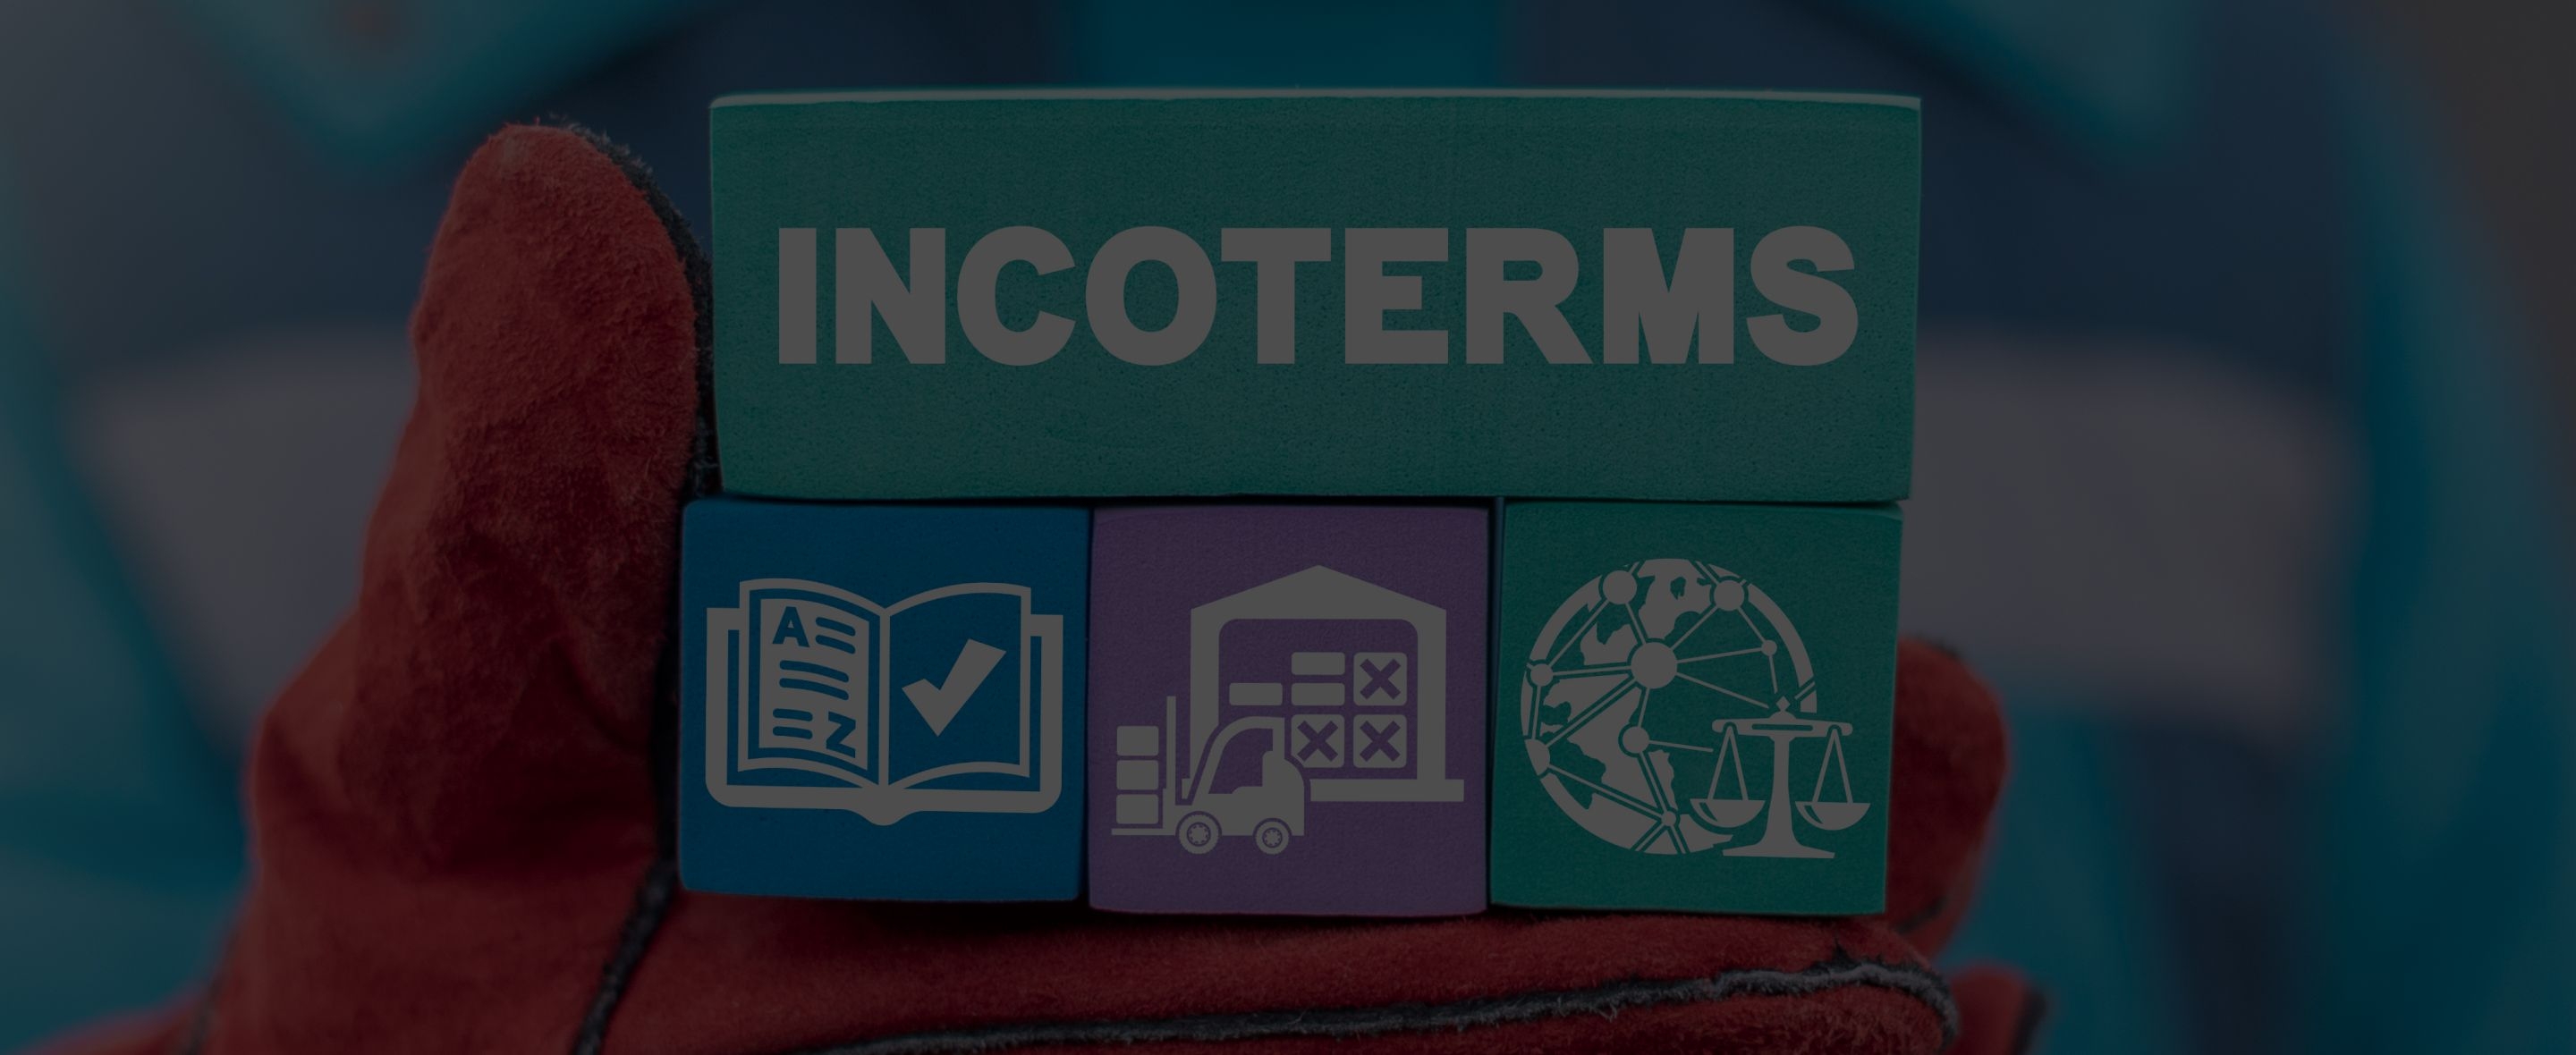 6 common Incoterms mistakes to avoid - Header.jpg